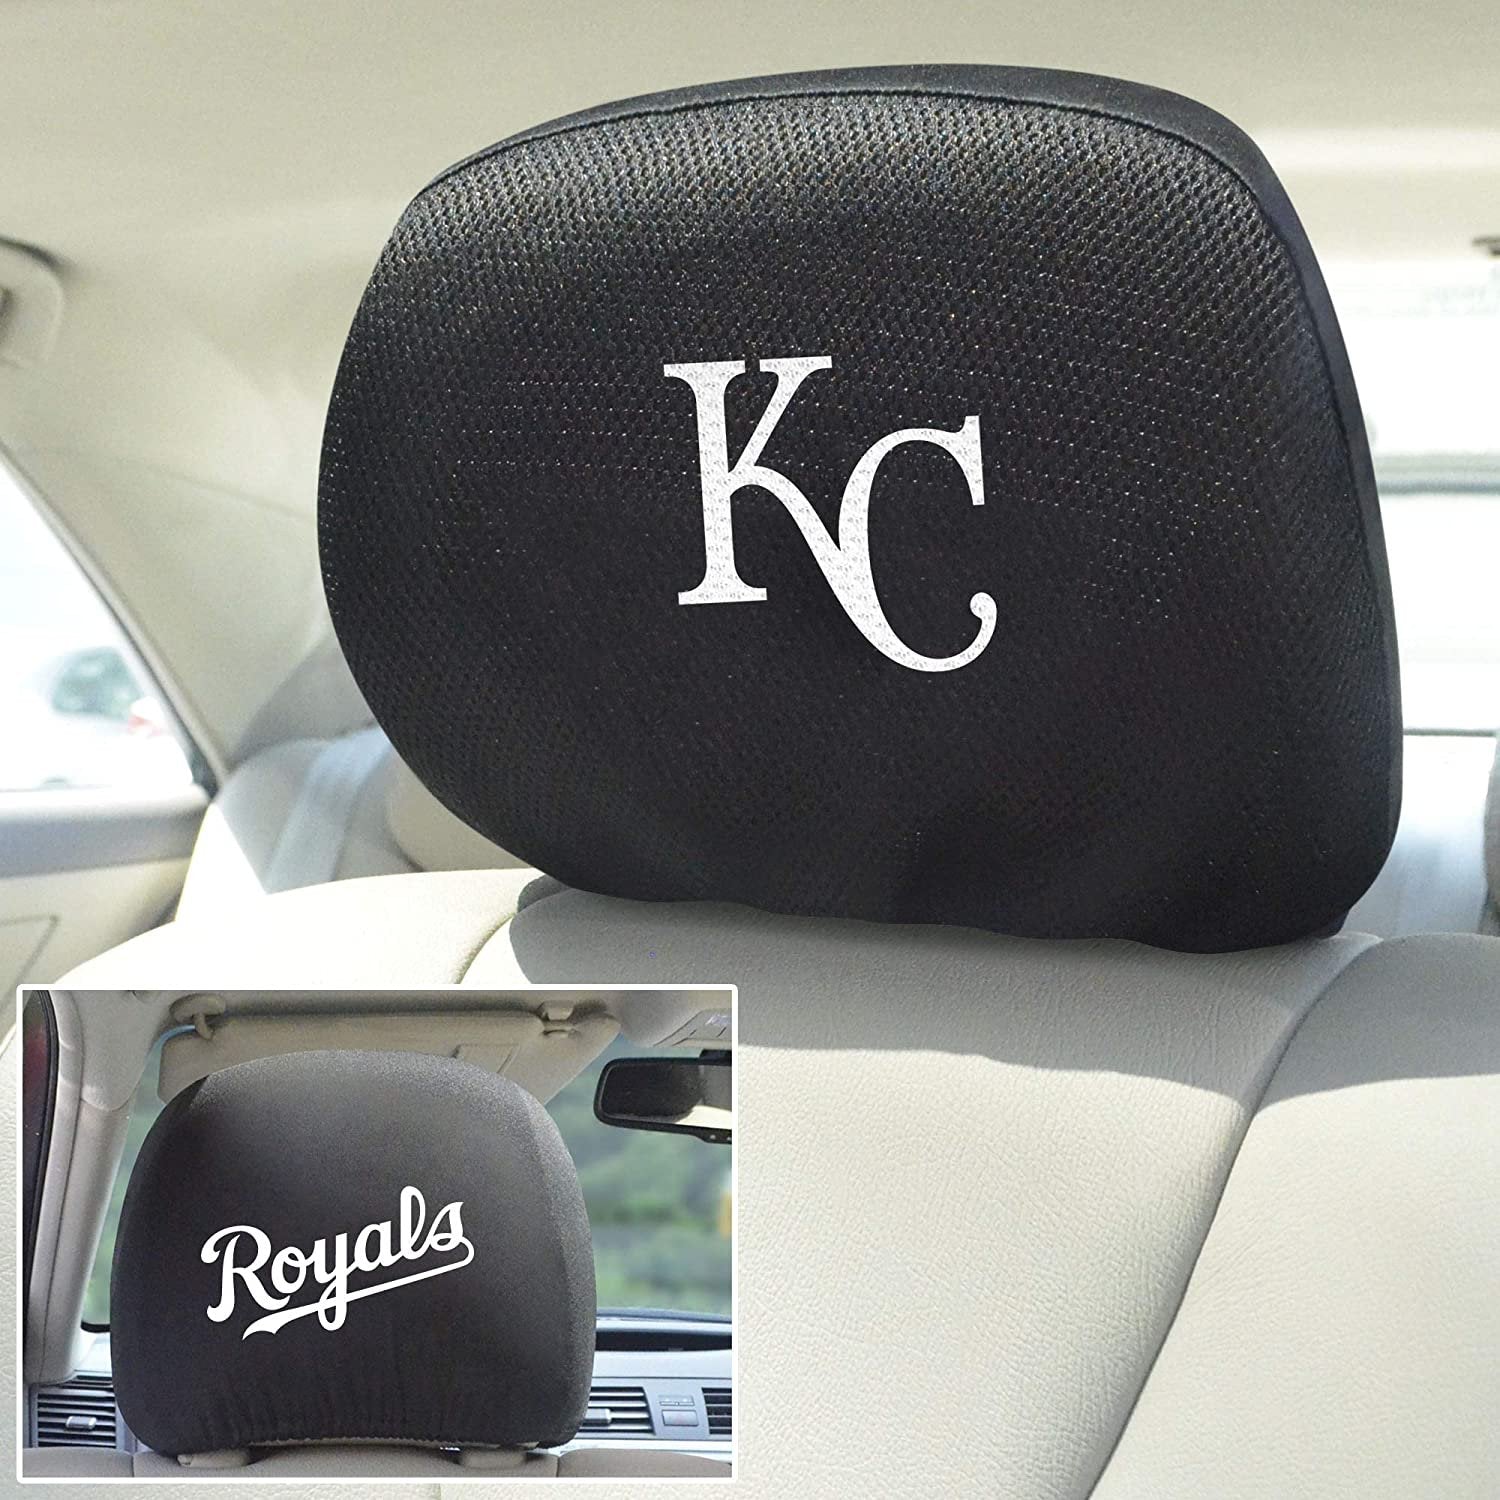 Kansas City Royals Pair of Premium Embroidered Auto Head Rest Covers, Black Elastic, 10x14 Inch